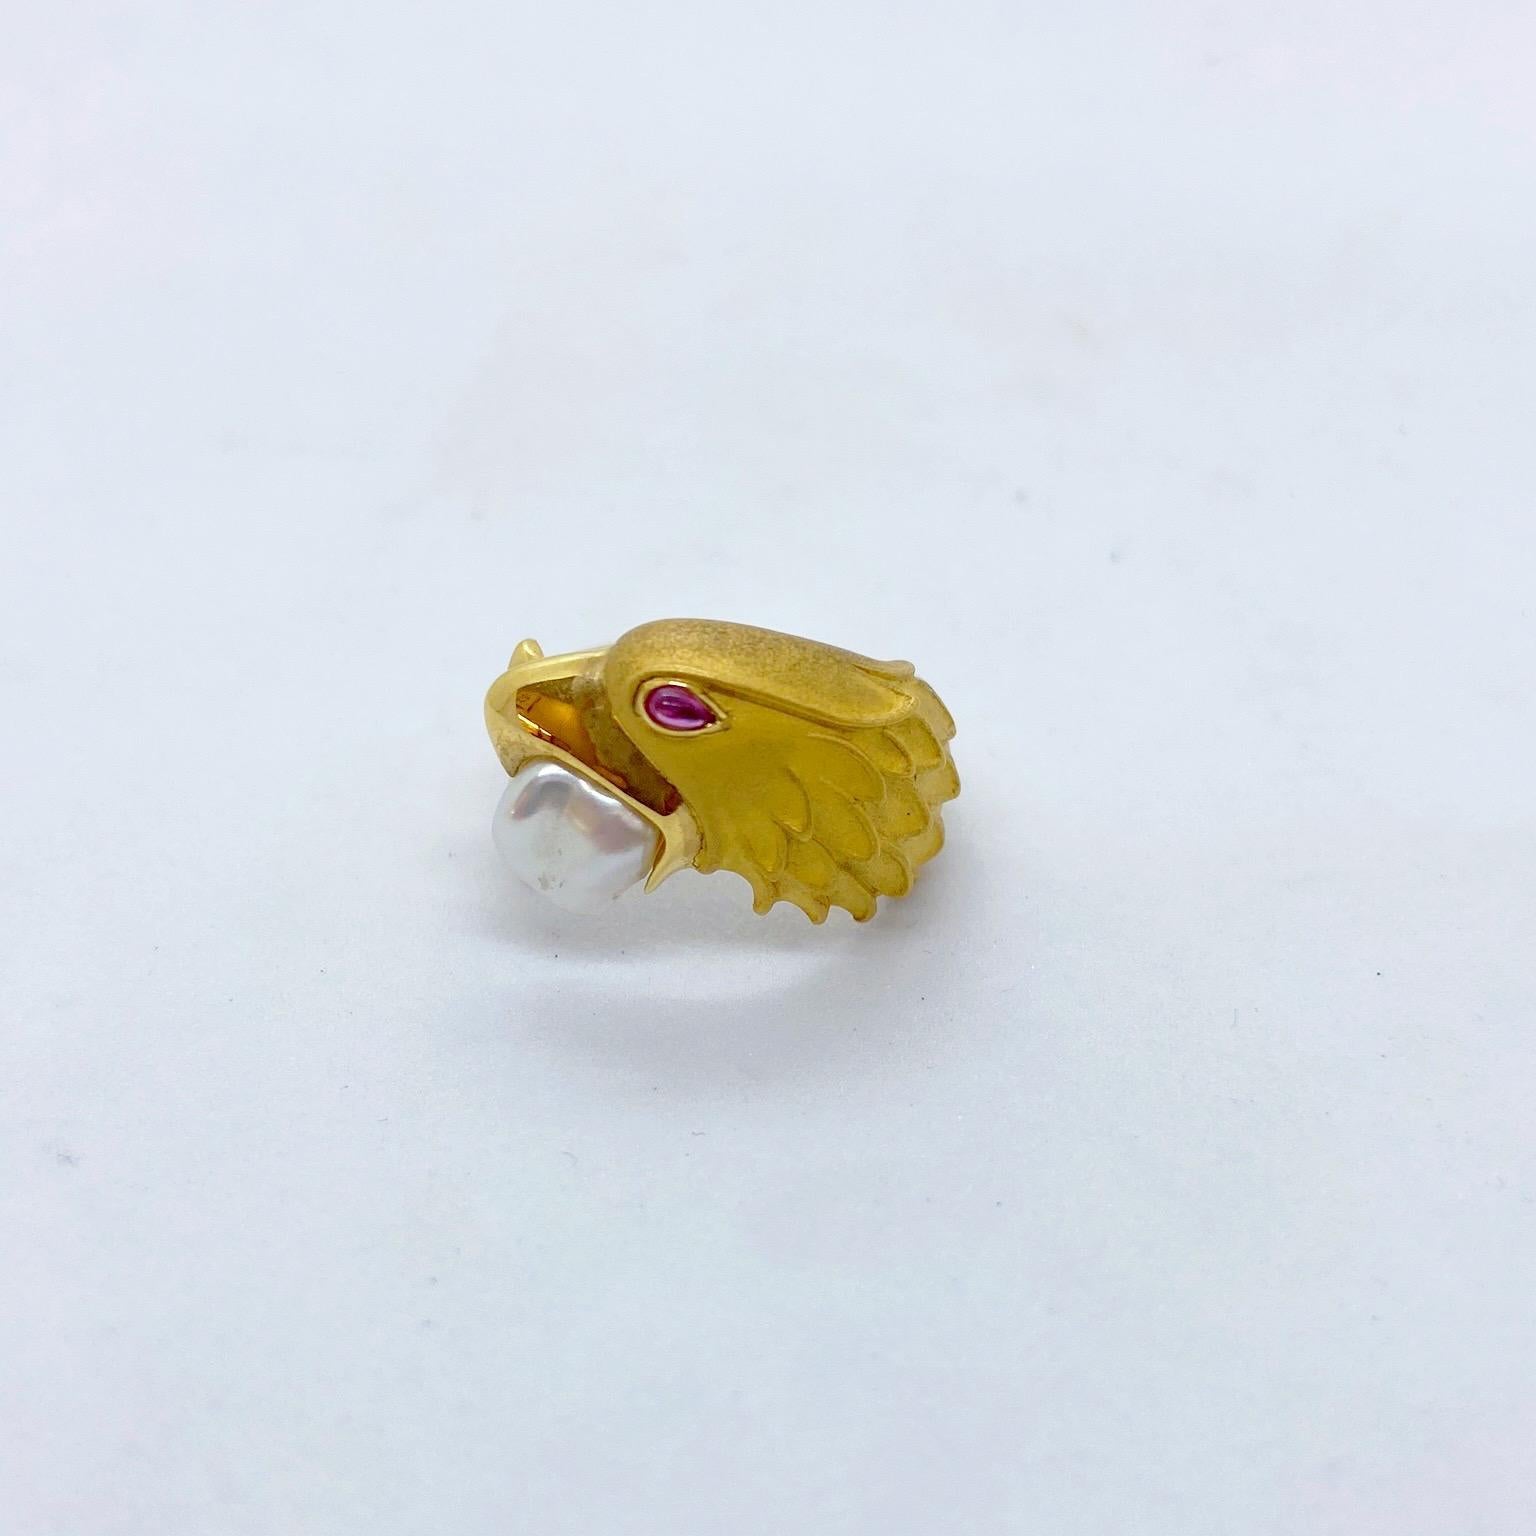 Carrera Y Carrera has built its famous name on figurative designs, an obsession with surface finishes, and a compelling way of seeing beauty in art and nature. This 18 karat yellow gold ring is a perfect example of Carrera's iconic designs. The ring